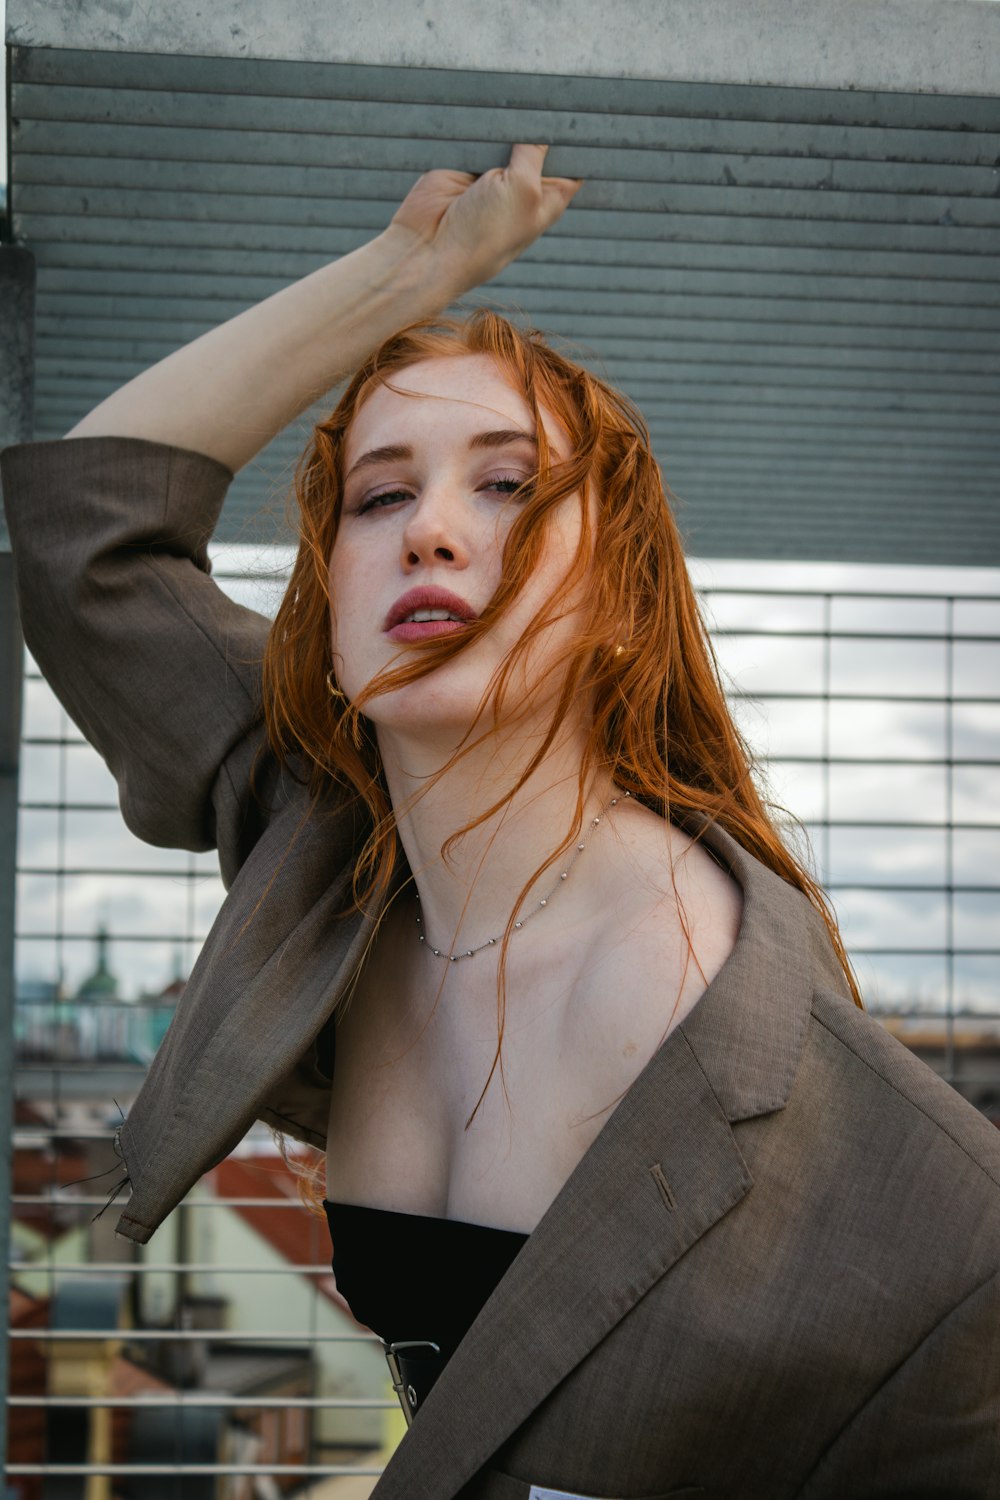 a woman with red hair wearing a suit